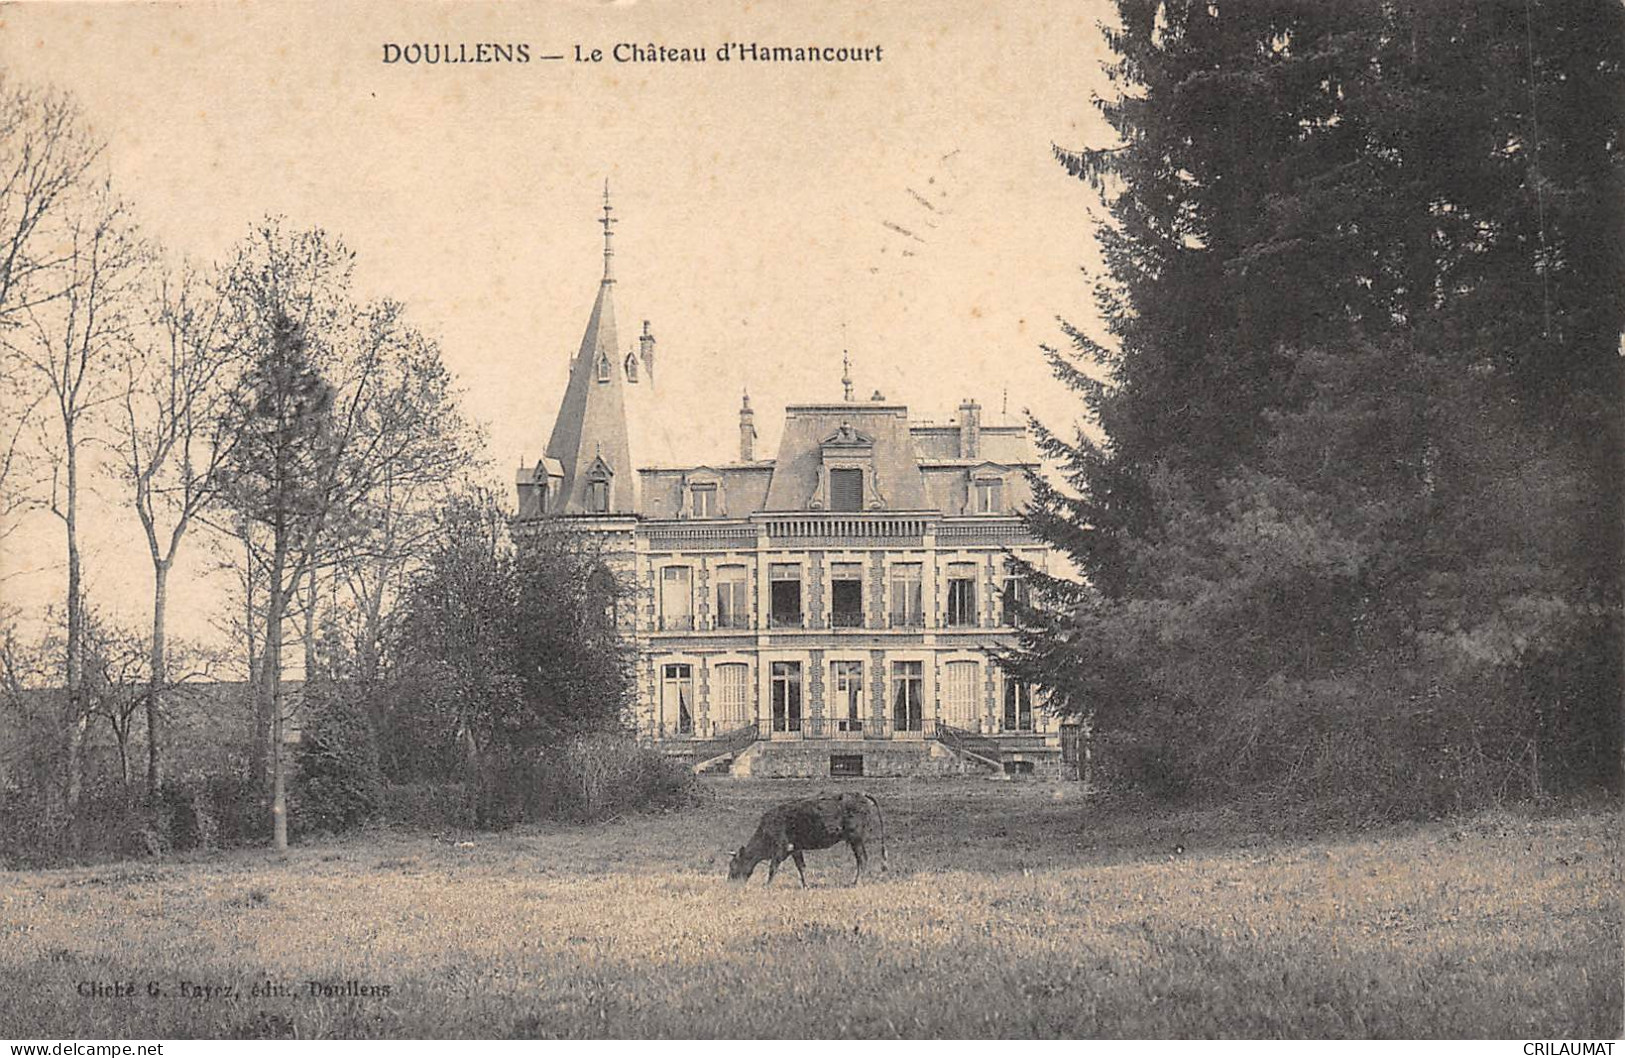 80-DOULLENS-Chateau D'Hamancourt-N 6004-H/0229 - Doullens